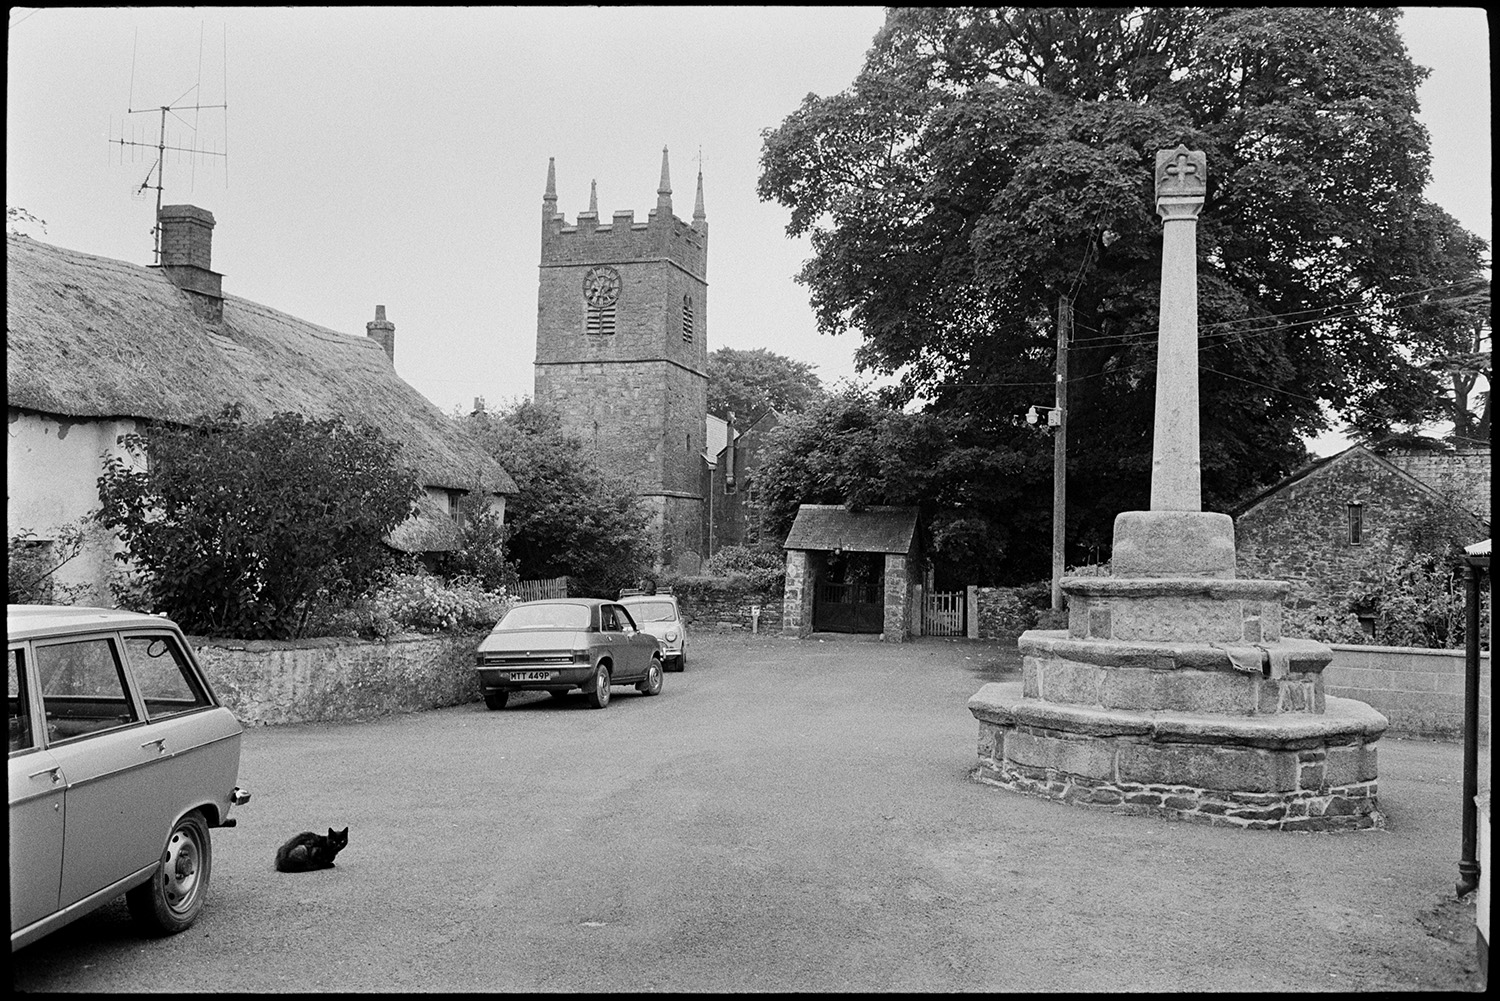 Street scenes, cars parked and bicycles, house with porch with stone pillars. 
[A street outside Northlew Church with a war memorial. A thatched cottage and parked cars are on the side of the street. A cat is sat by one of the cars. The gate to the church can also be seen.]